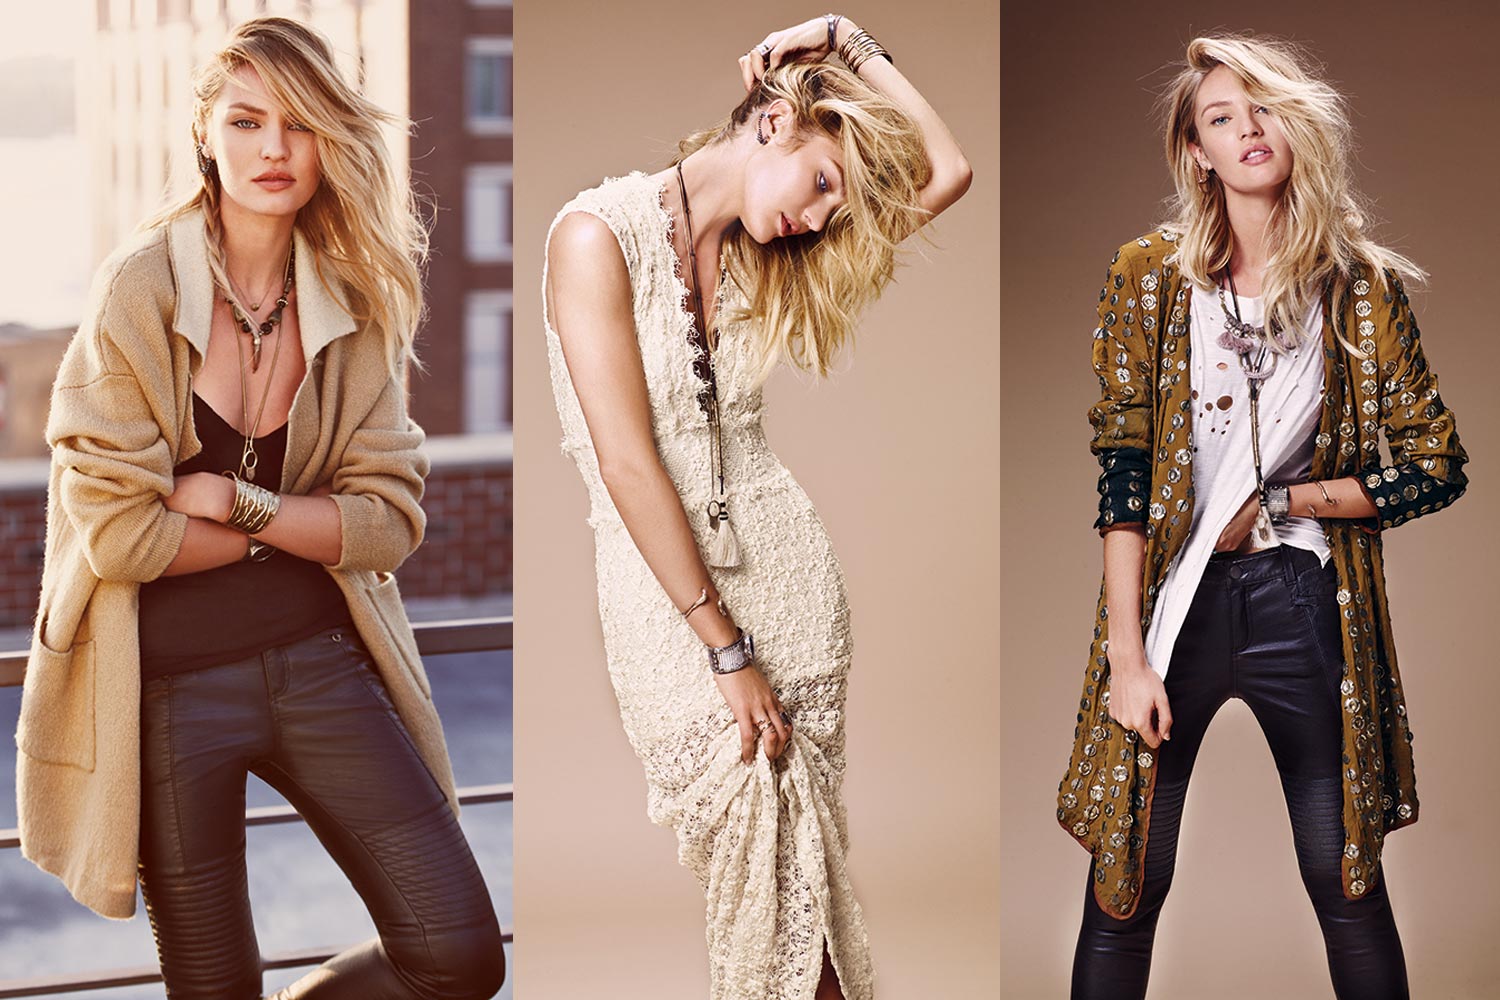 How To Become A Free People Model And How To Model For Free People - Beautiful Blonde South African Model Candice Swanepoel Modeling For Free People Advertisements (Free People Ads).